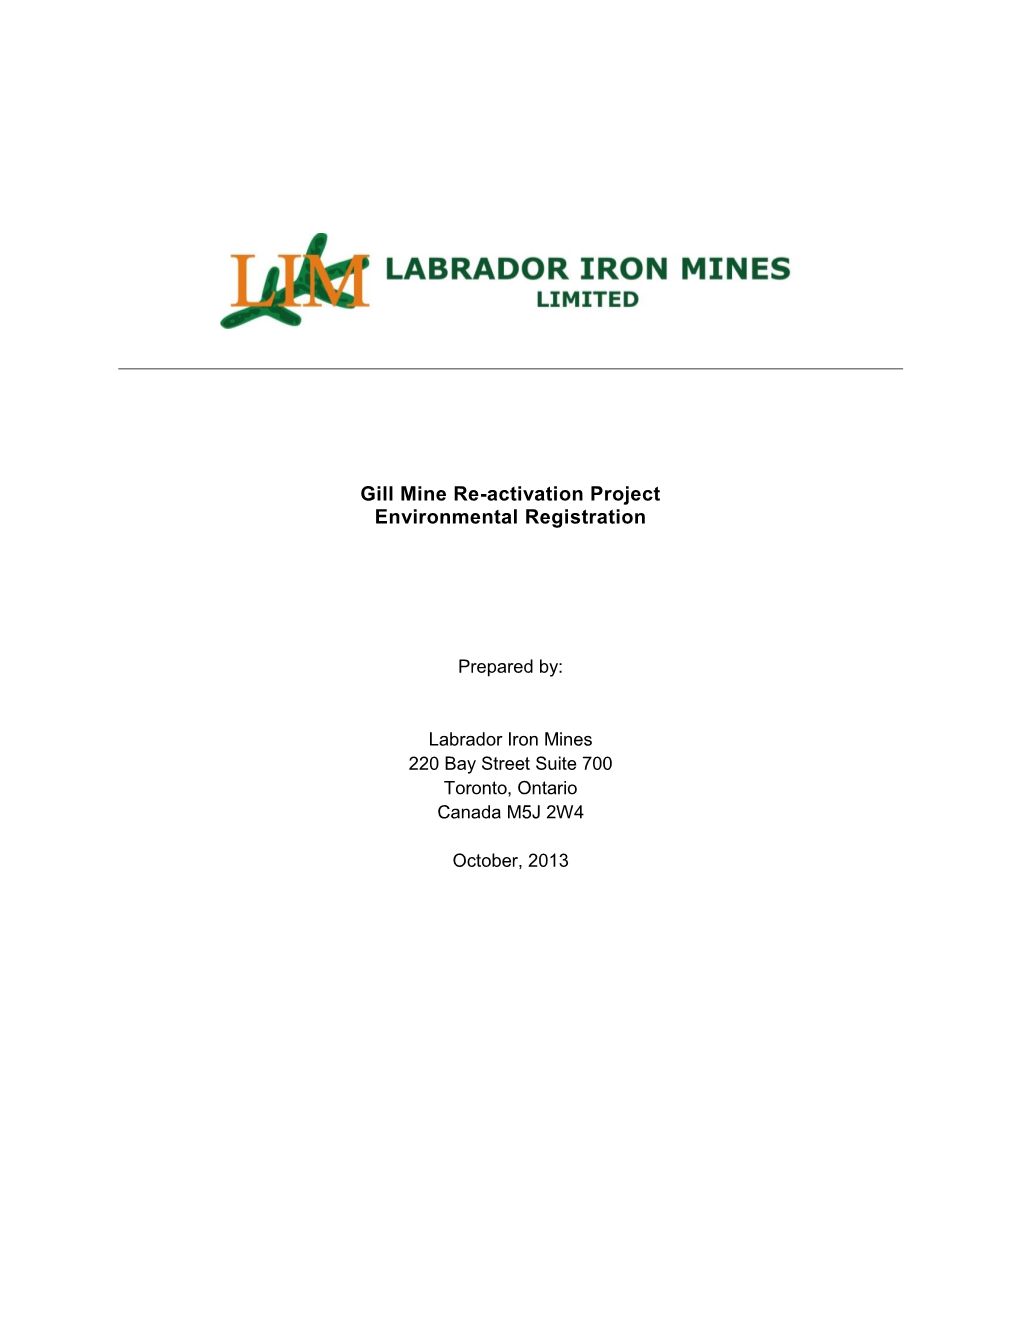 Gill Mine Re-Activation Project Environmental Registration